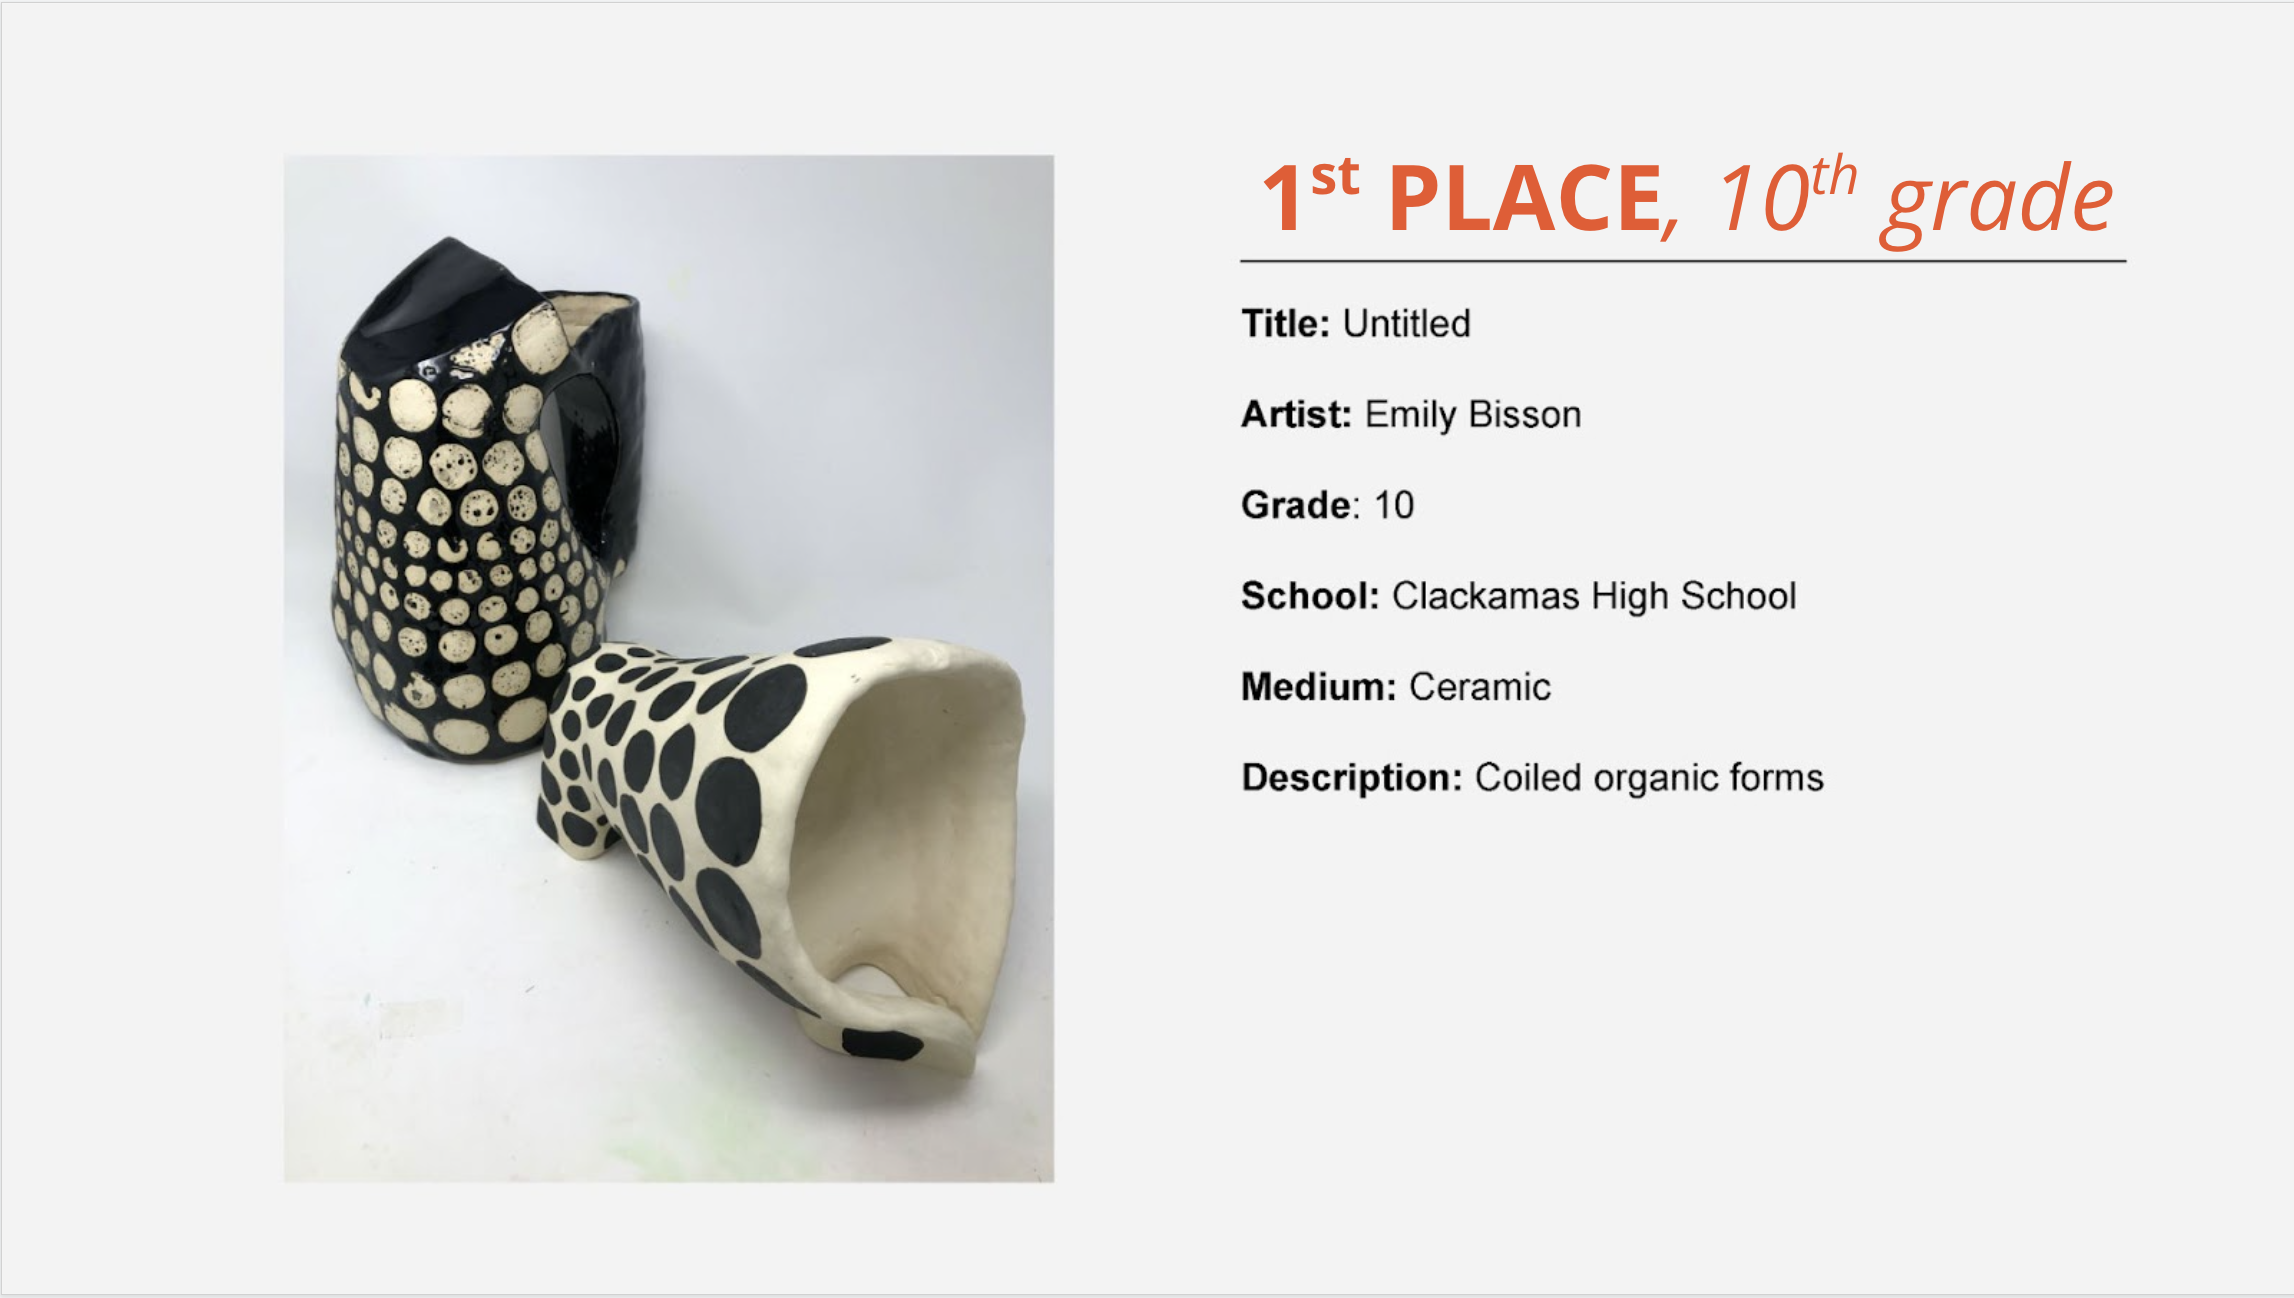 1st place, 10th grade: black and white polka-dotted pitchers with handles. Title: Untitled Artist: Emily Bisson Grade: 10 School: Clackamas High School Medium: Ceramic Description: Coiled organic forms